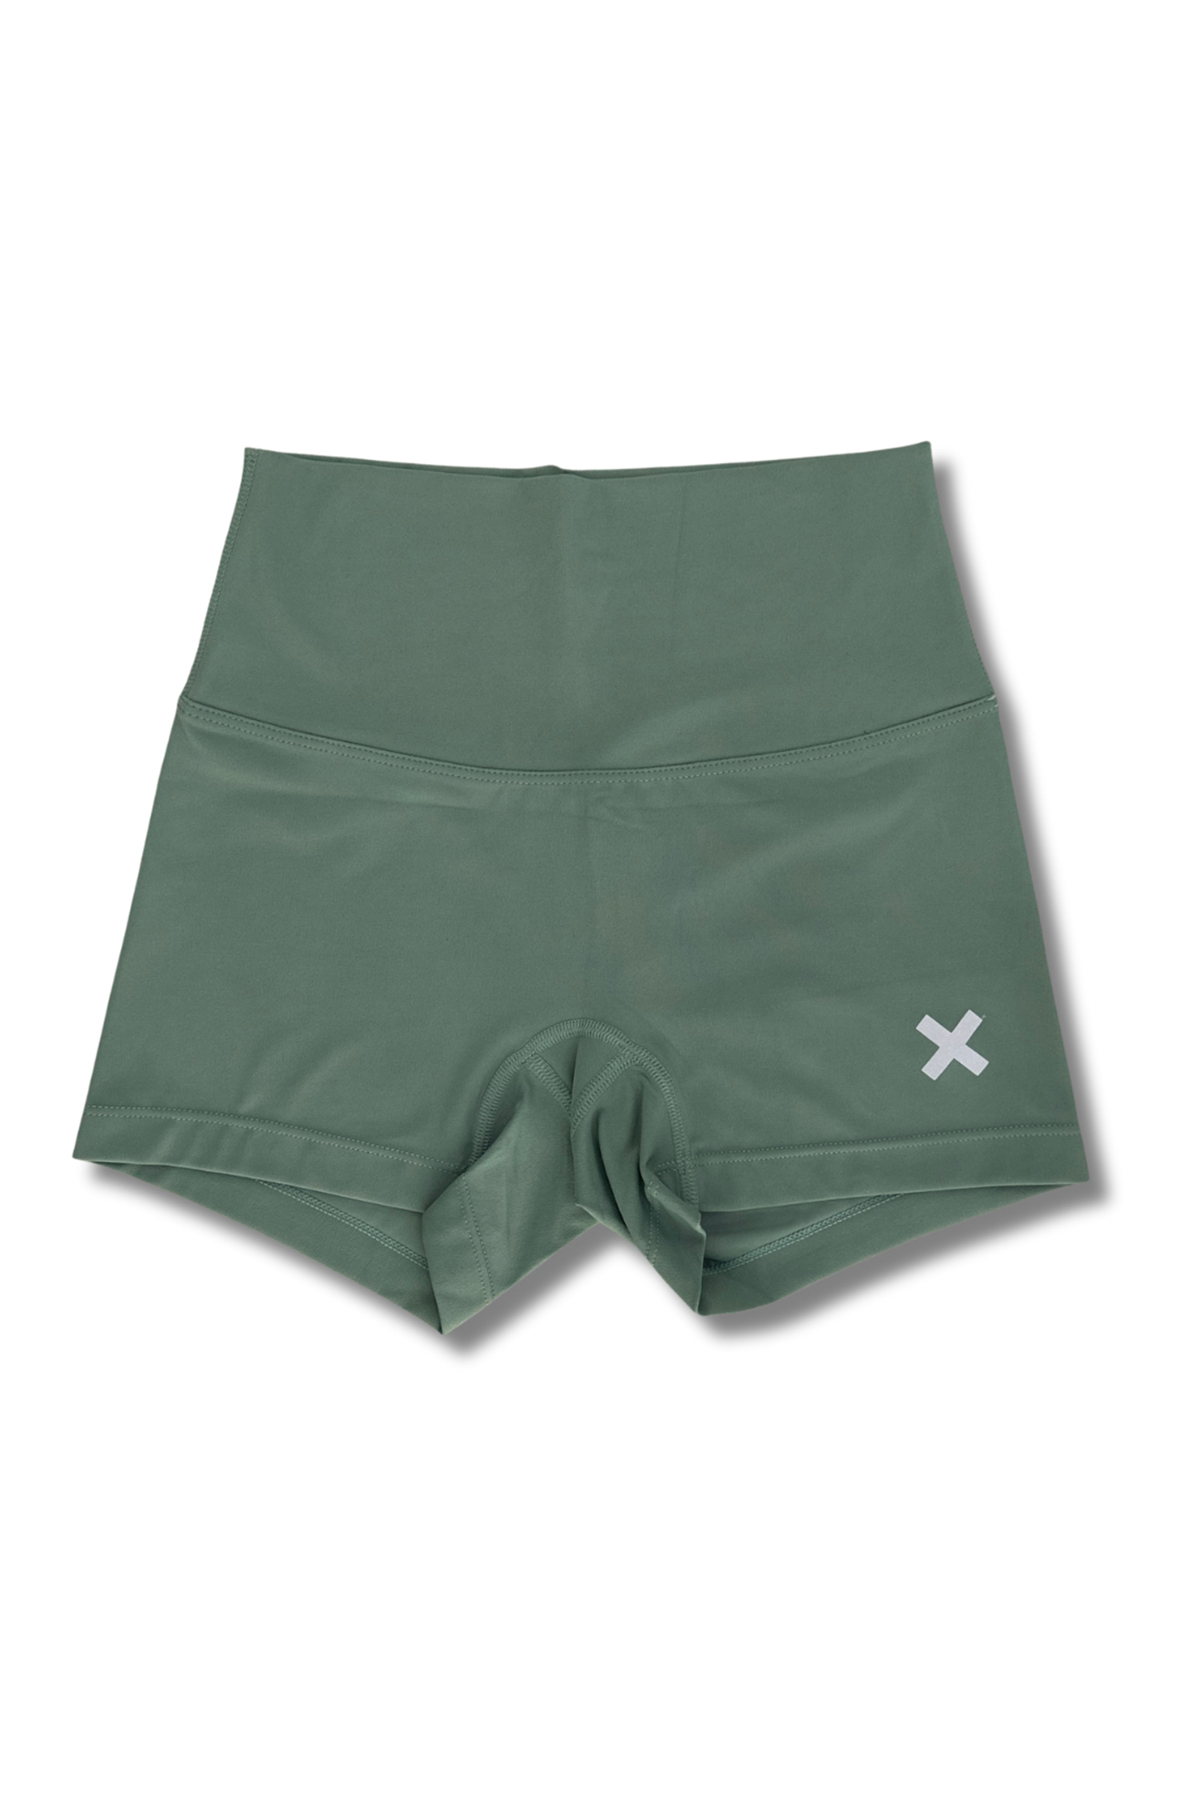 High-rise-Training-Shorts-Dusty Mint-front